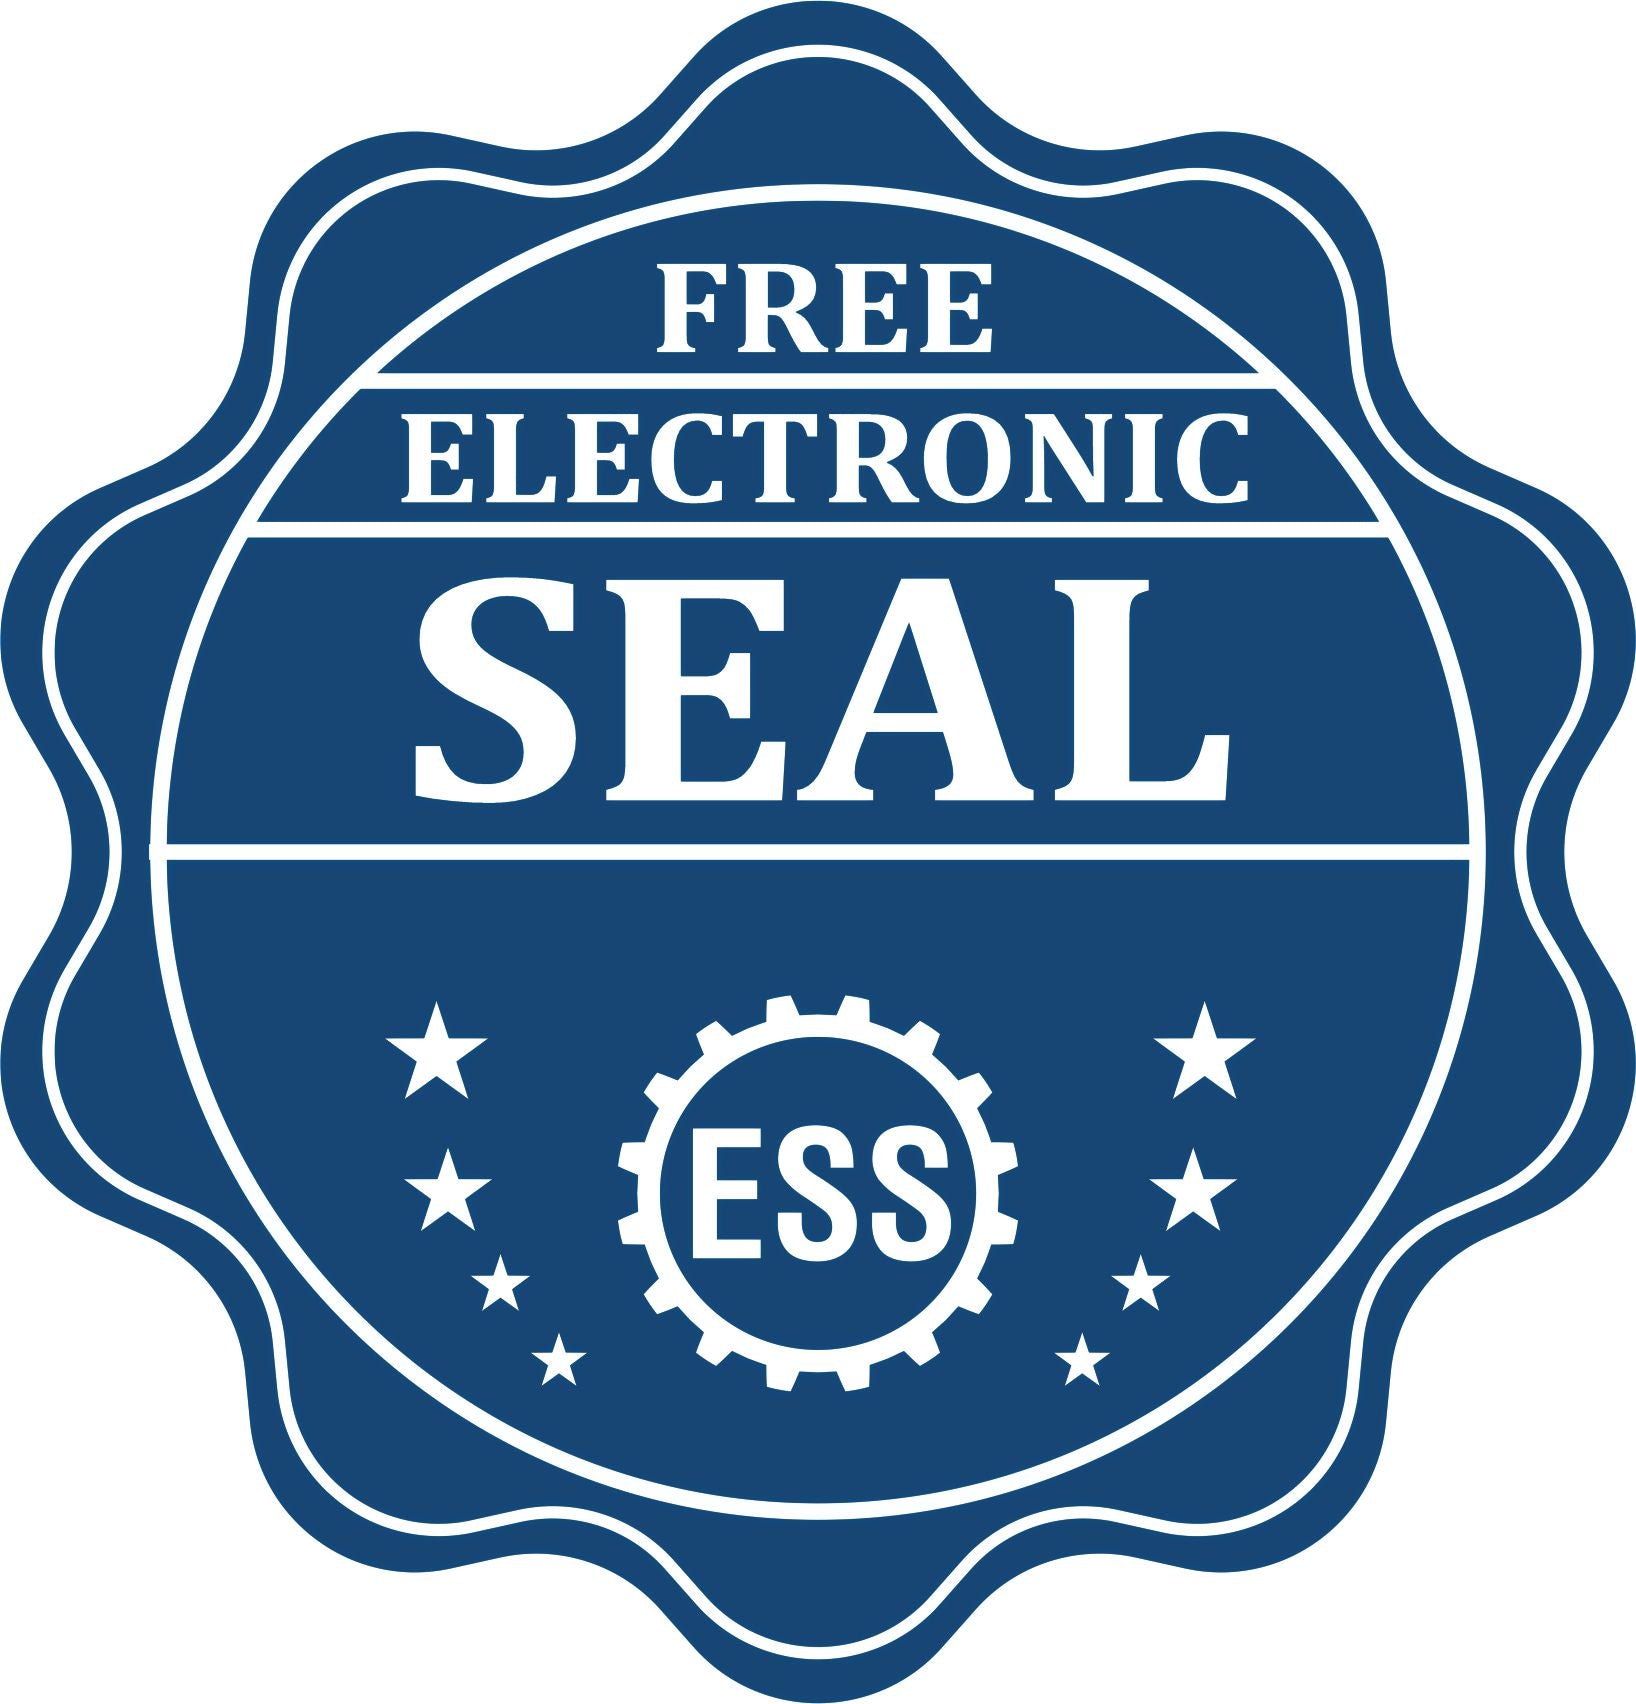 A badge showing a free electronic seal for the MaxLight Premium Pre-Inked South Dakota Rectangular Notarial Stamp with stars and the ESS gear on the emblem.